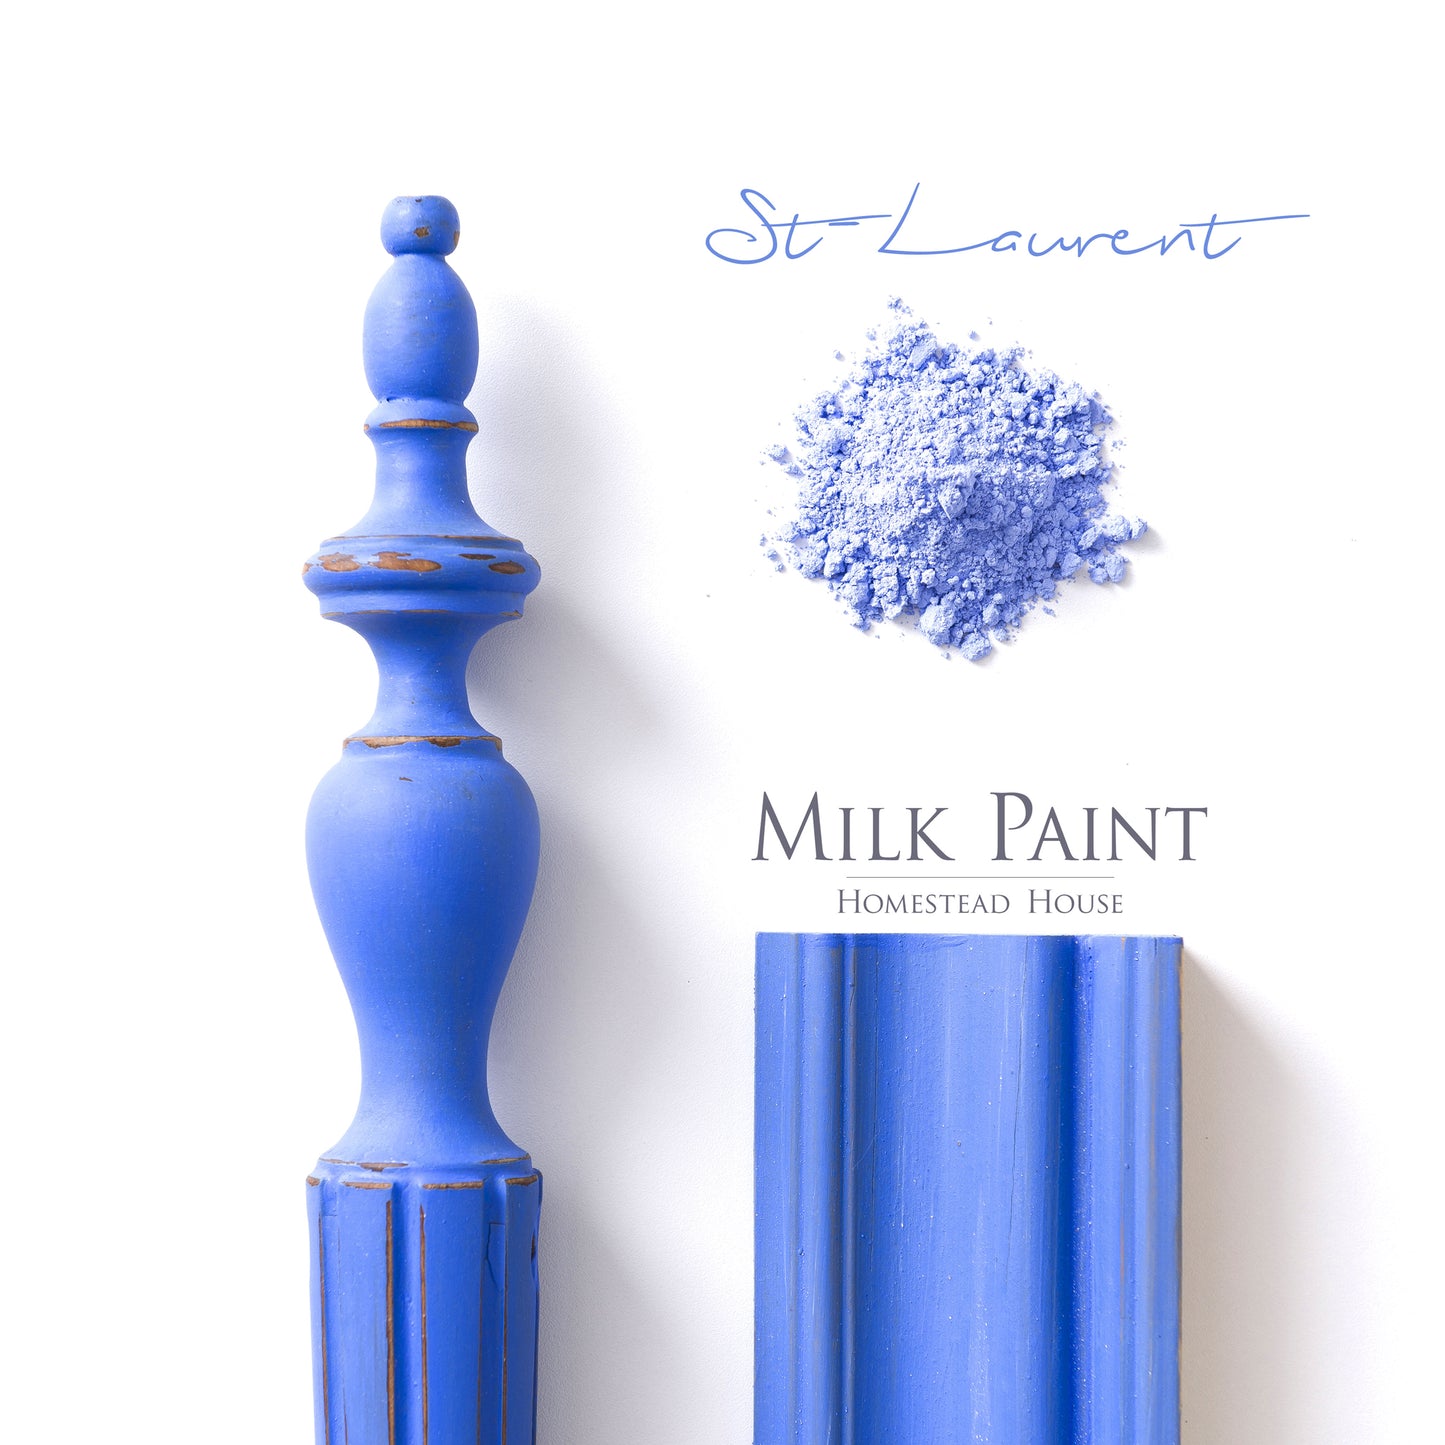 Milk Paint from Homestead House in St. Laurent, a midtone Blue with a hint of lavender.  |  homesteadhouse.ca